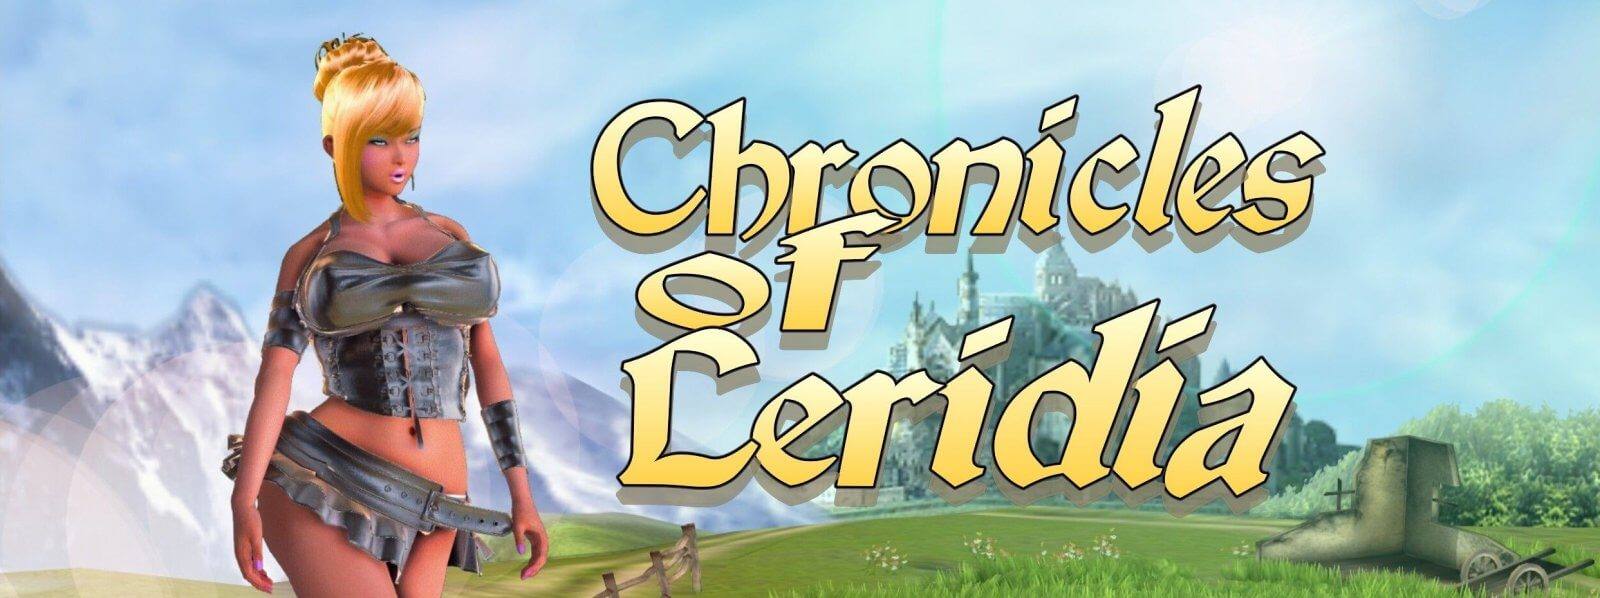 Chronicles of Leridia porn xxx game download cover